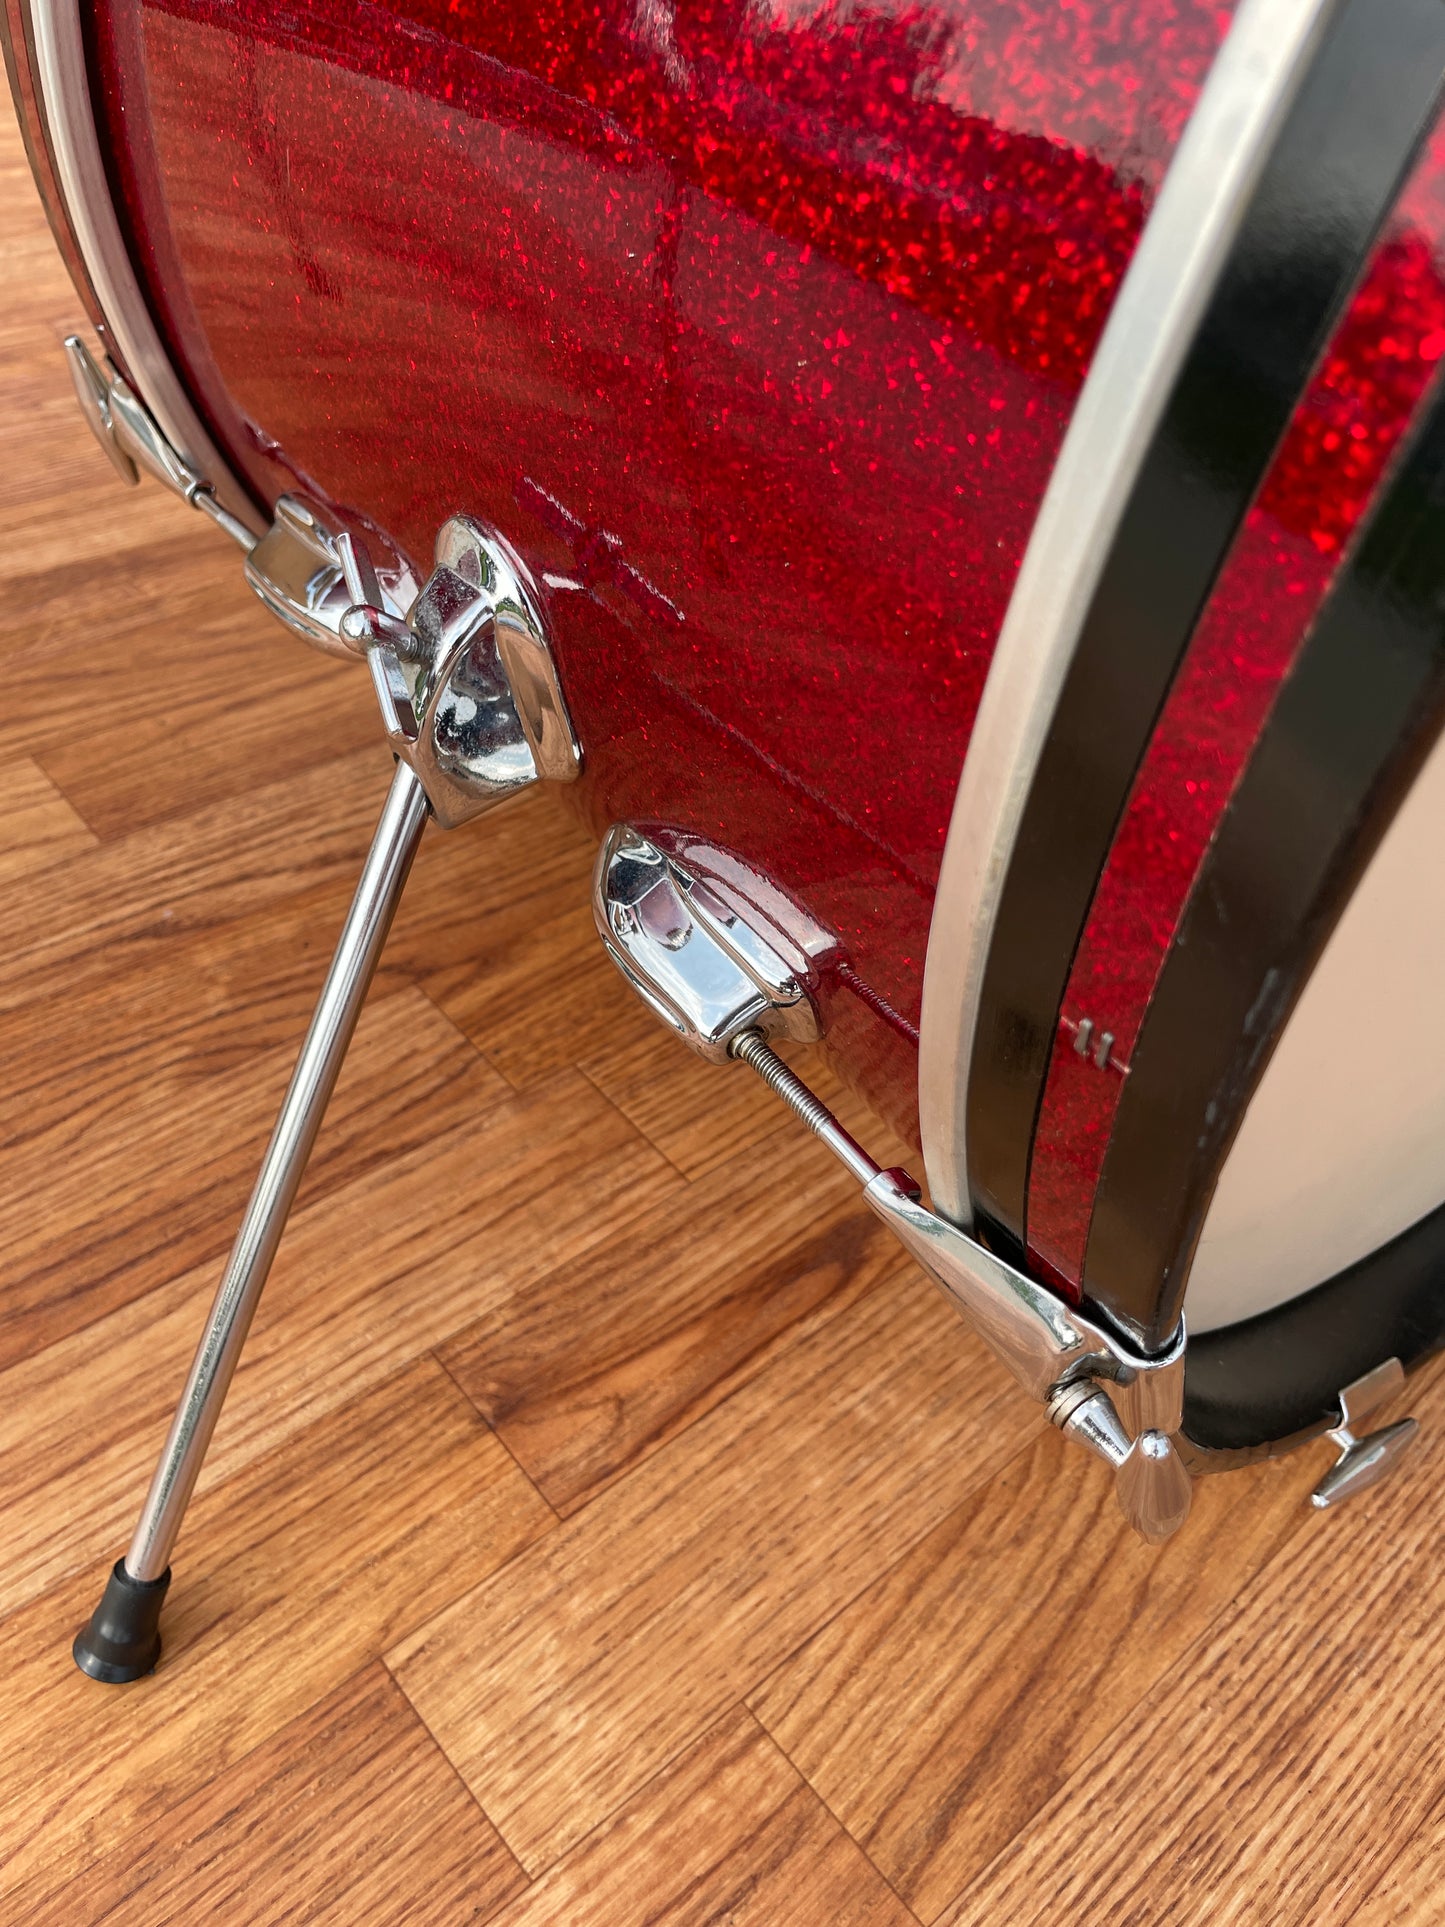 1963 Slingerland Modern Solo Outfit 2R Drum Set Red Glass Glitter Sparkle